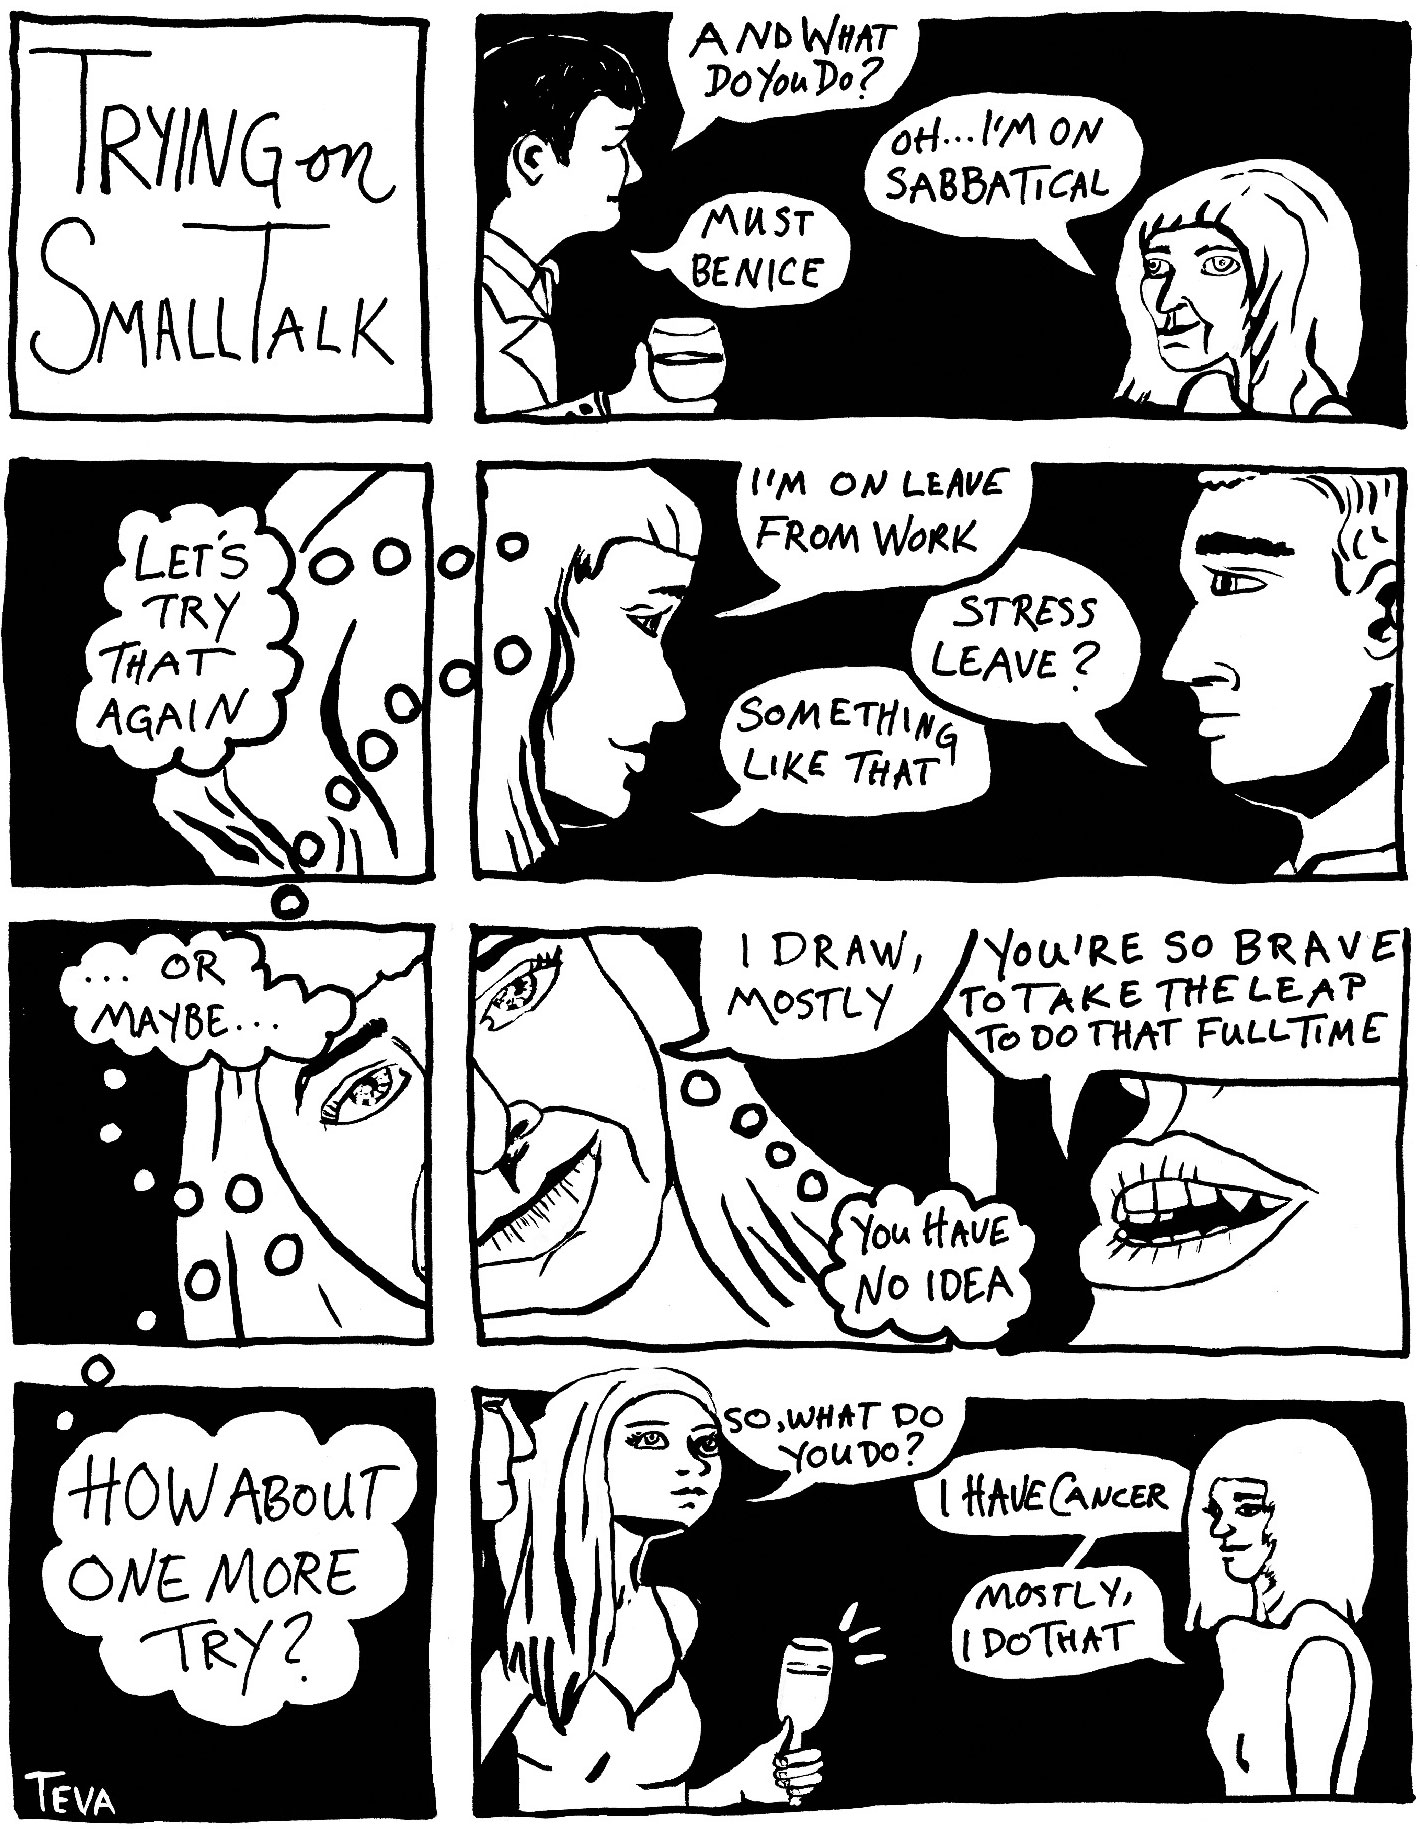 Image of Teva's comic on Trying on Small Talk